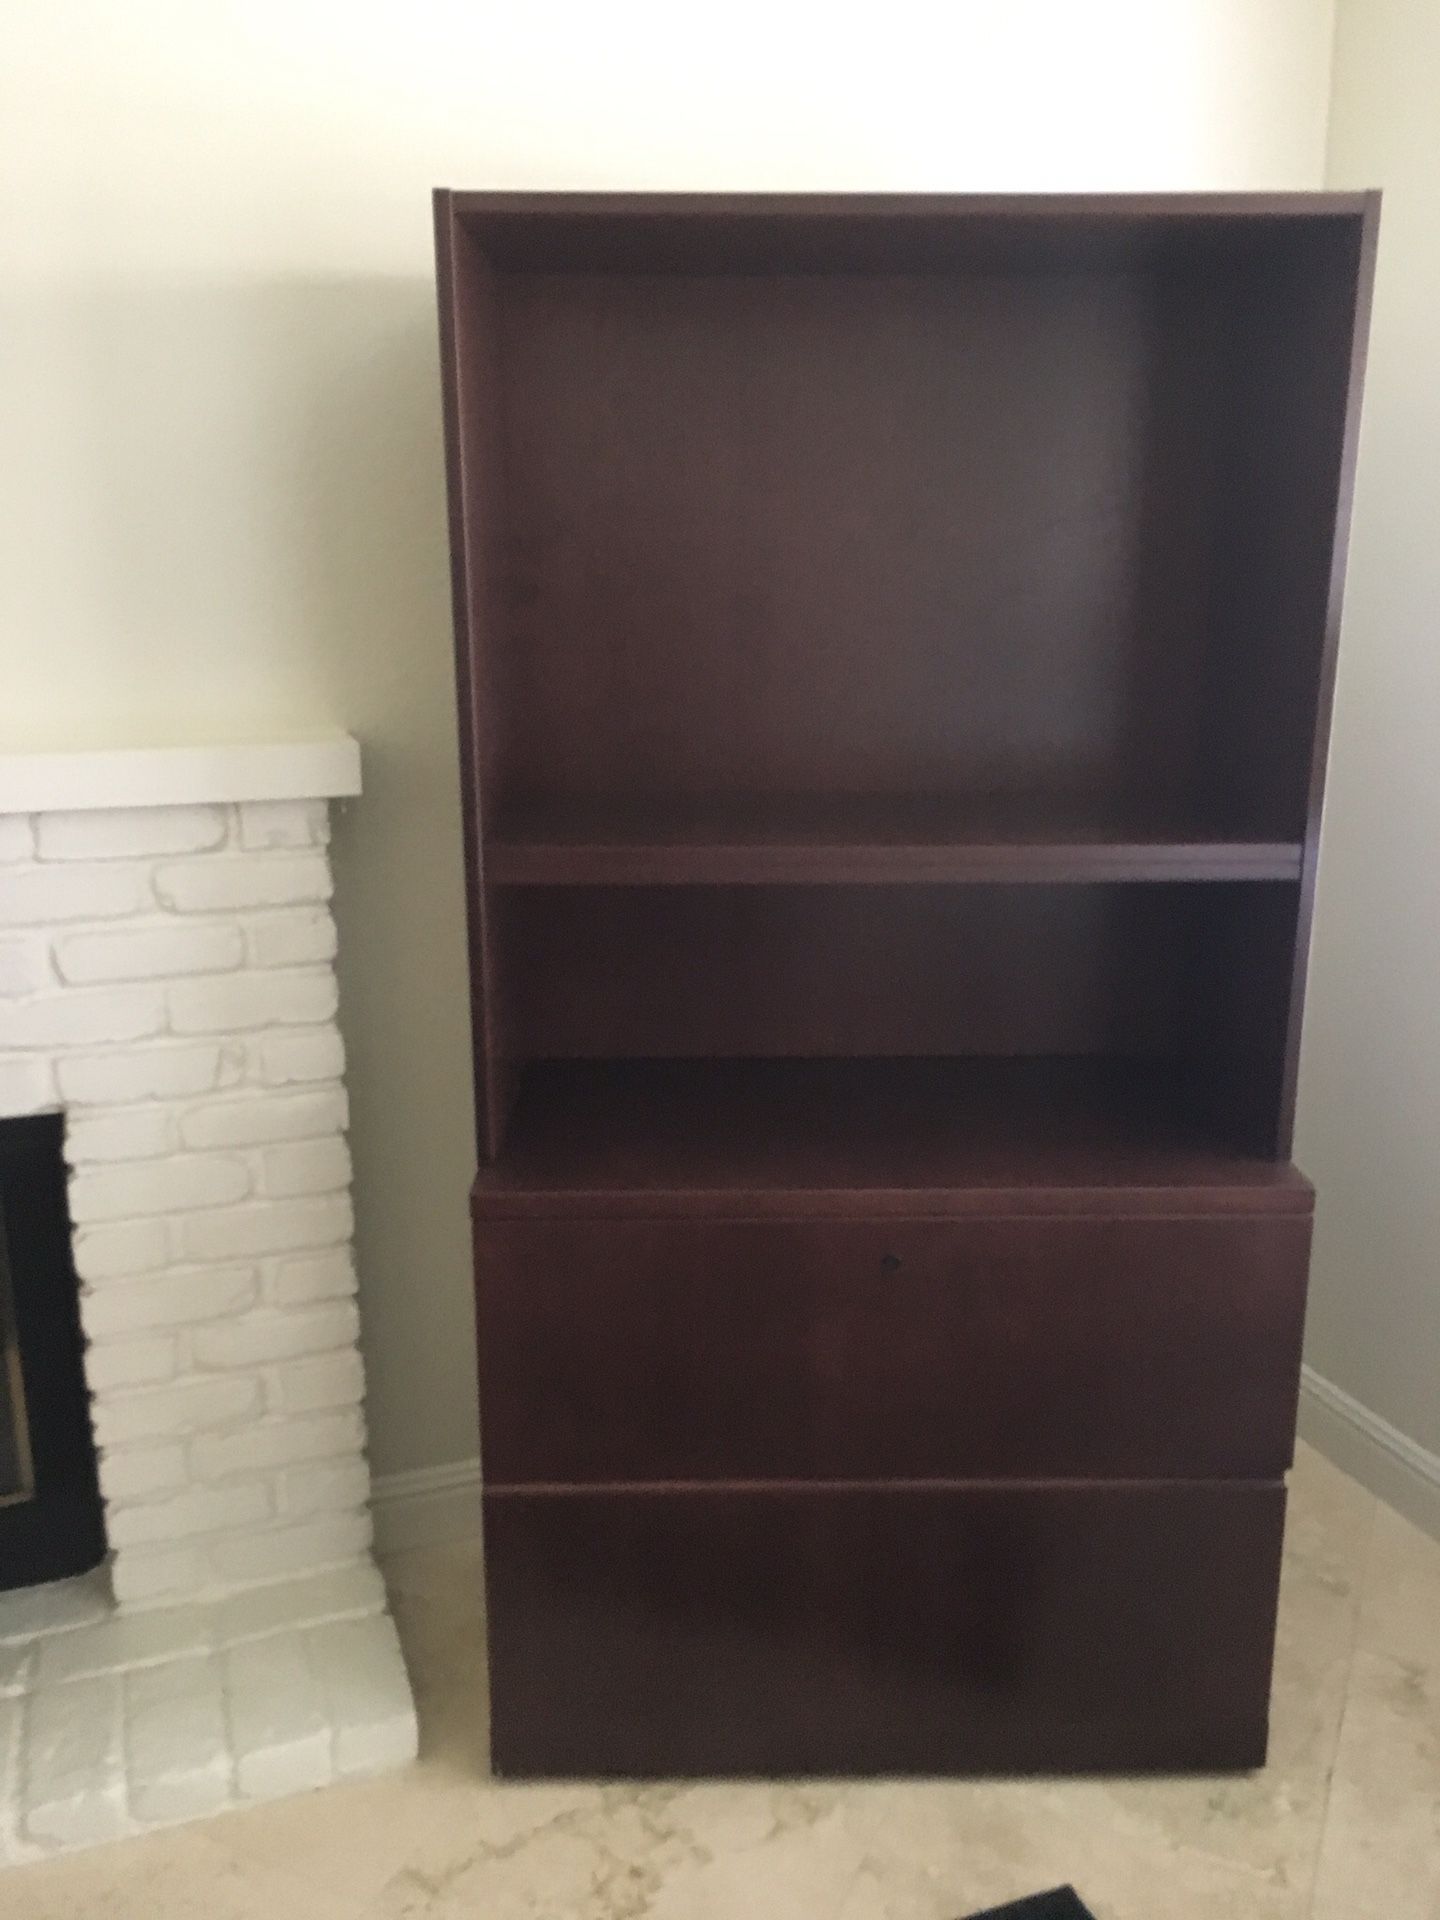 Display/book shelves with 2 filing drawers.